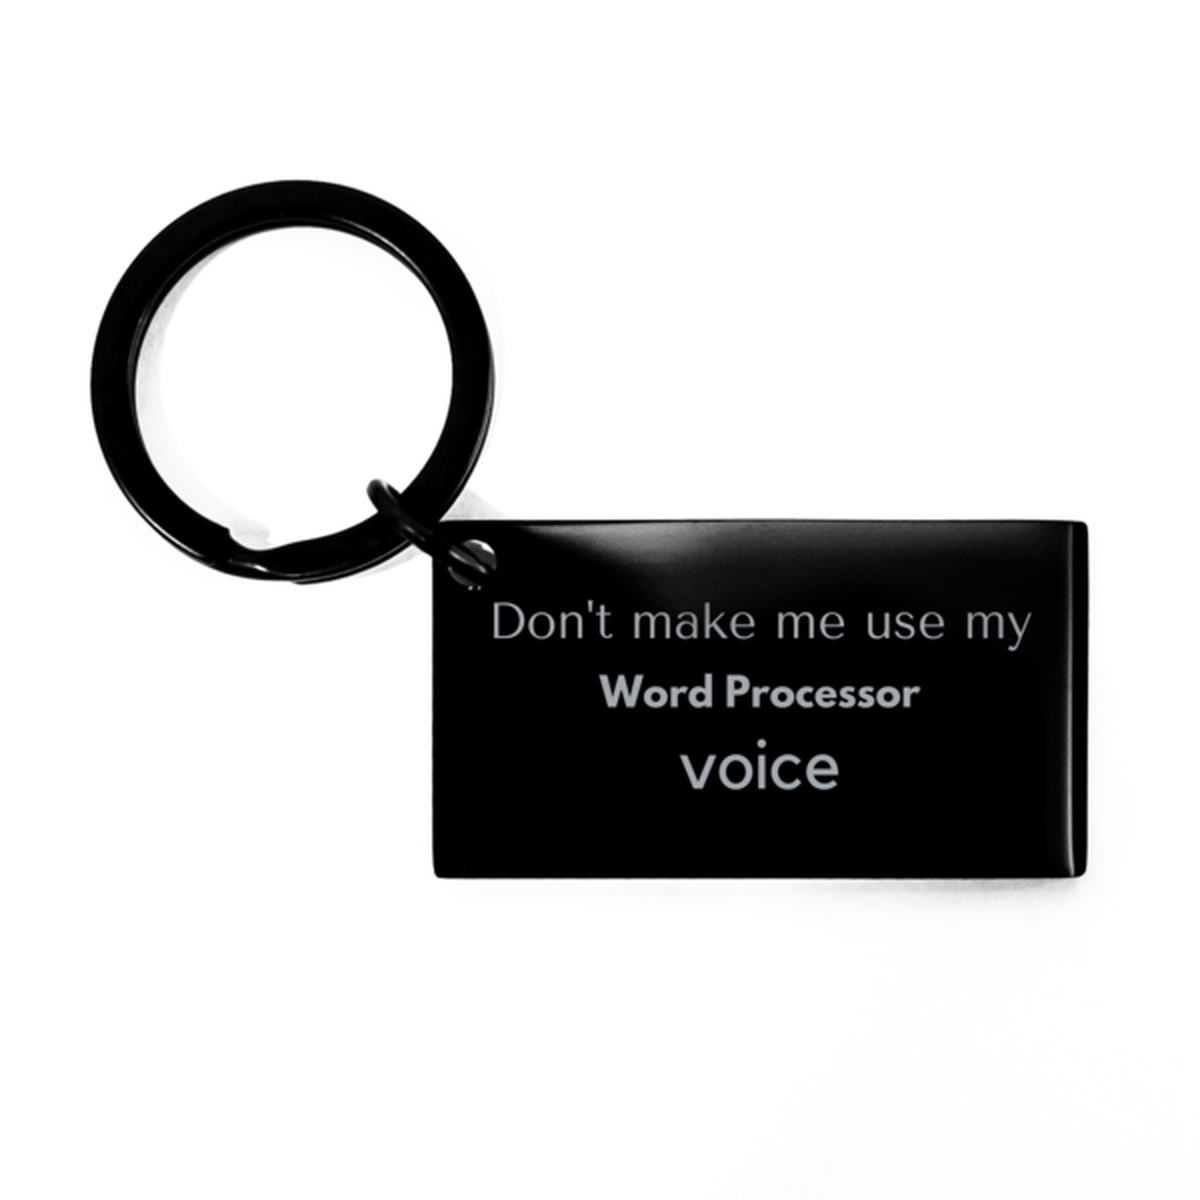 Don't make me use my Word Processor voice, Sarcasm Word Processor Gifts, Christmas Word Processor Keychain Birthday Unique Gifts For Word Processor Coworkers, Men, Women, Colleague, Friends